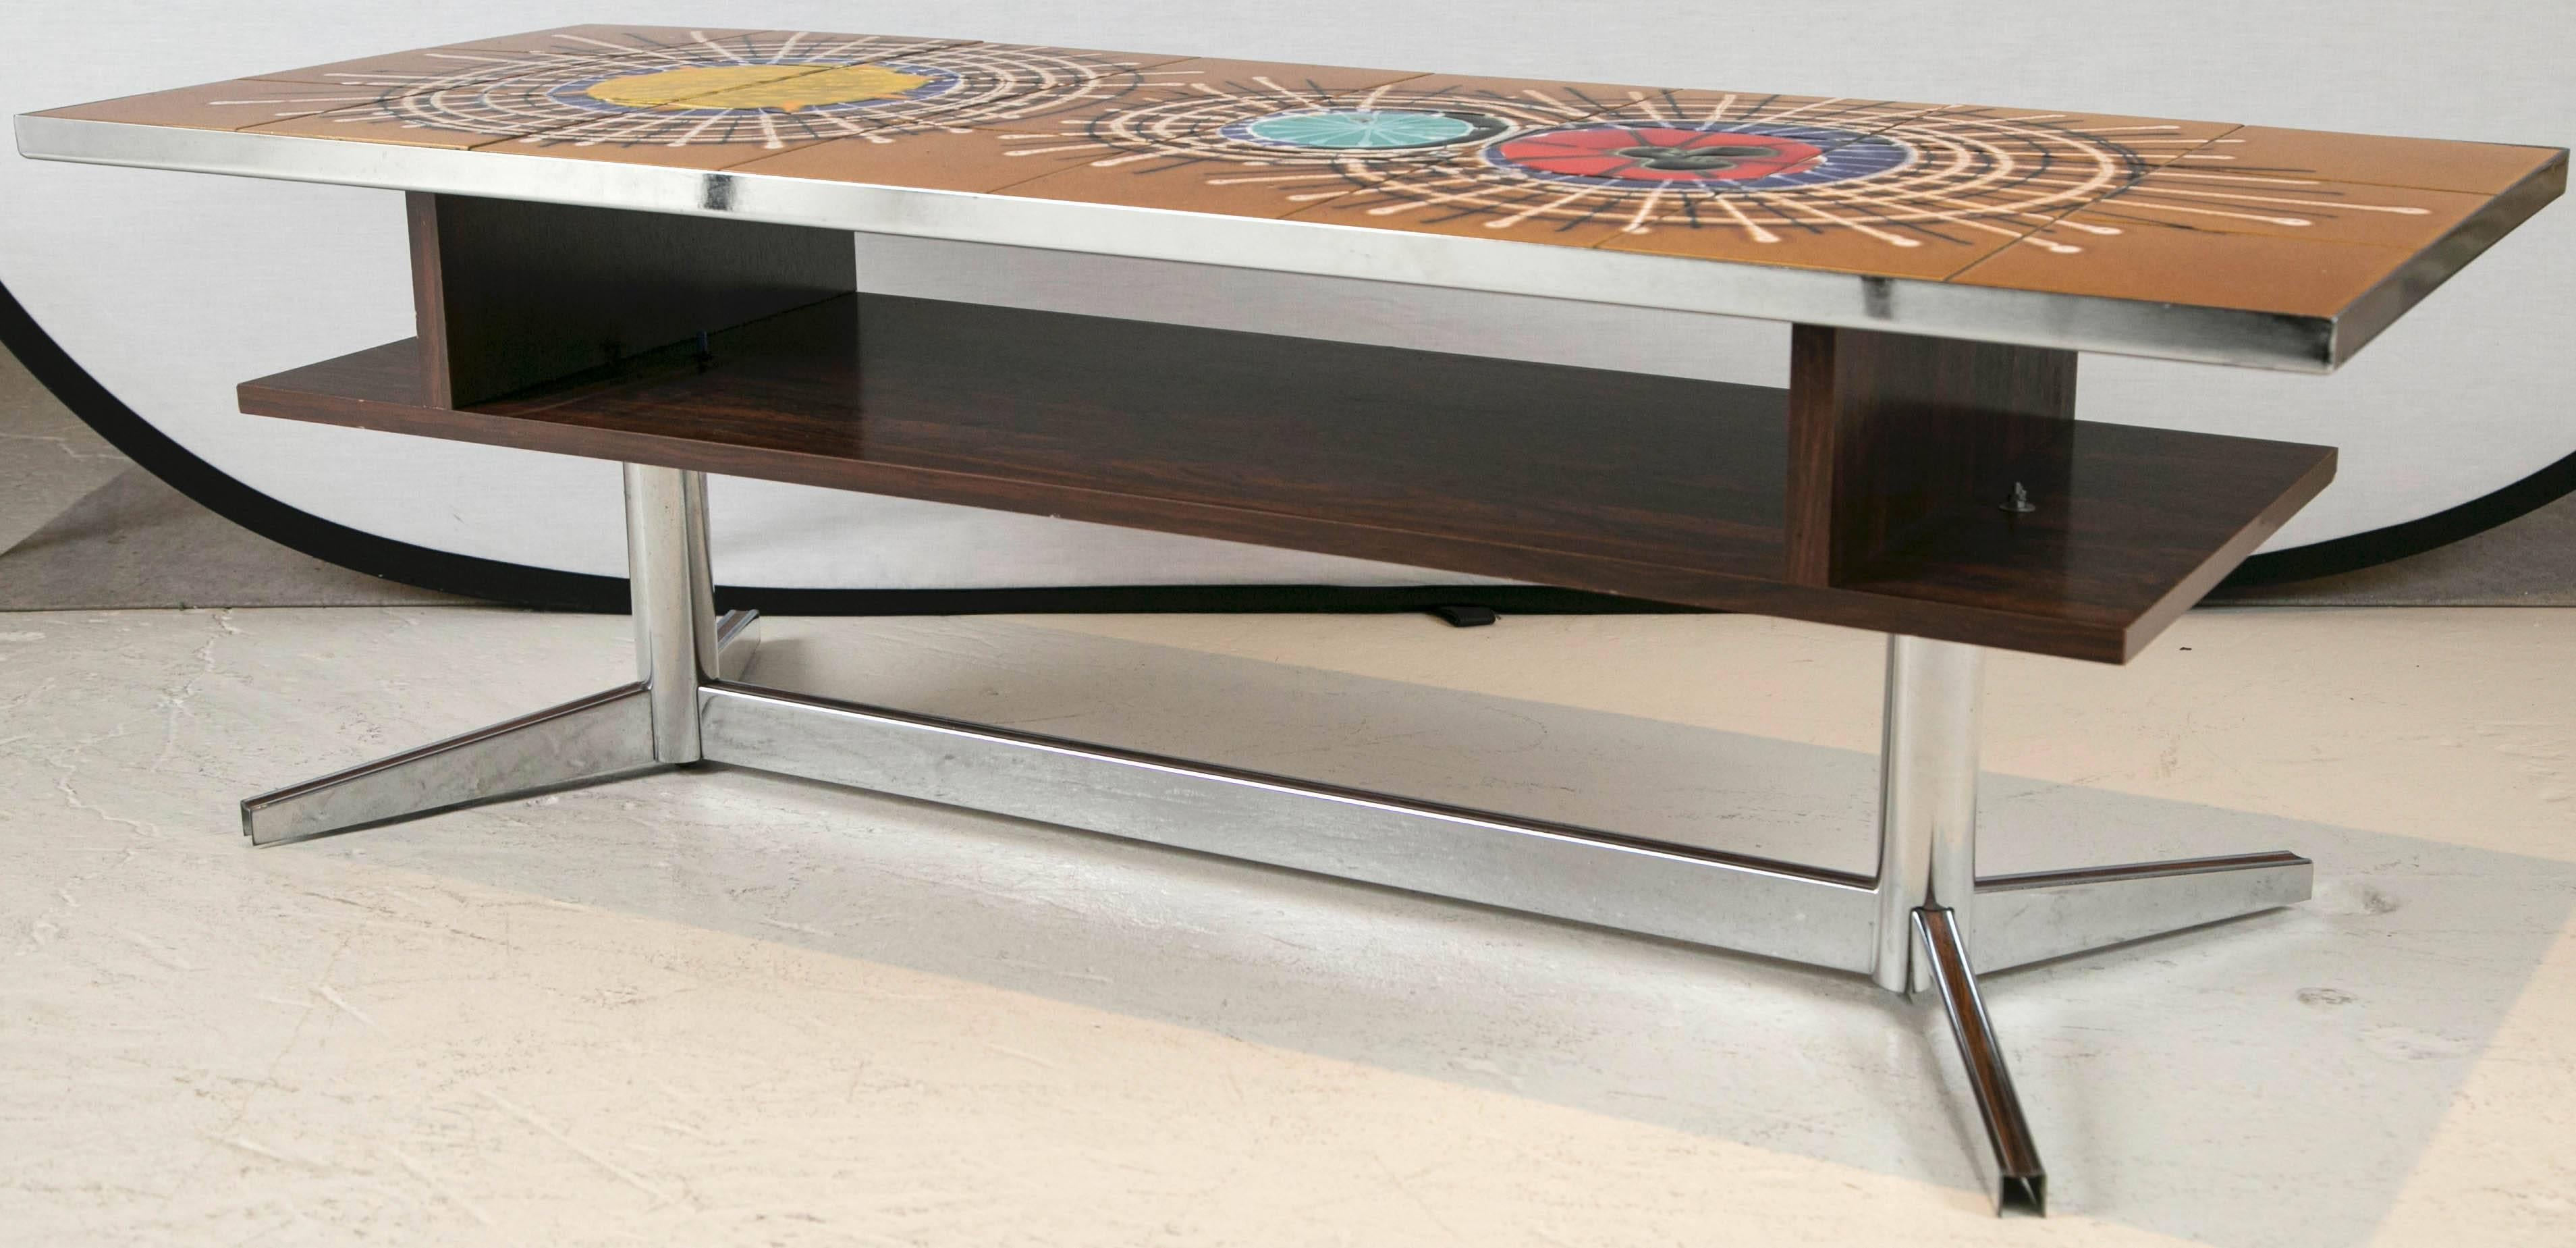 Rosewood, Chrome and abstract glazed tile-top coffee table, circa 1960s.
Wonderful colors and cool abstract designed glaze tile top with rosewood veneered under table shelf and inlaid on chrome legs minor chip on one tile, otherwise excellent